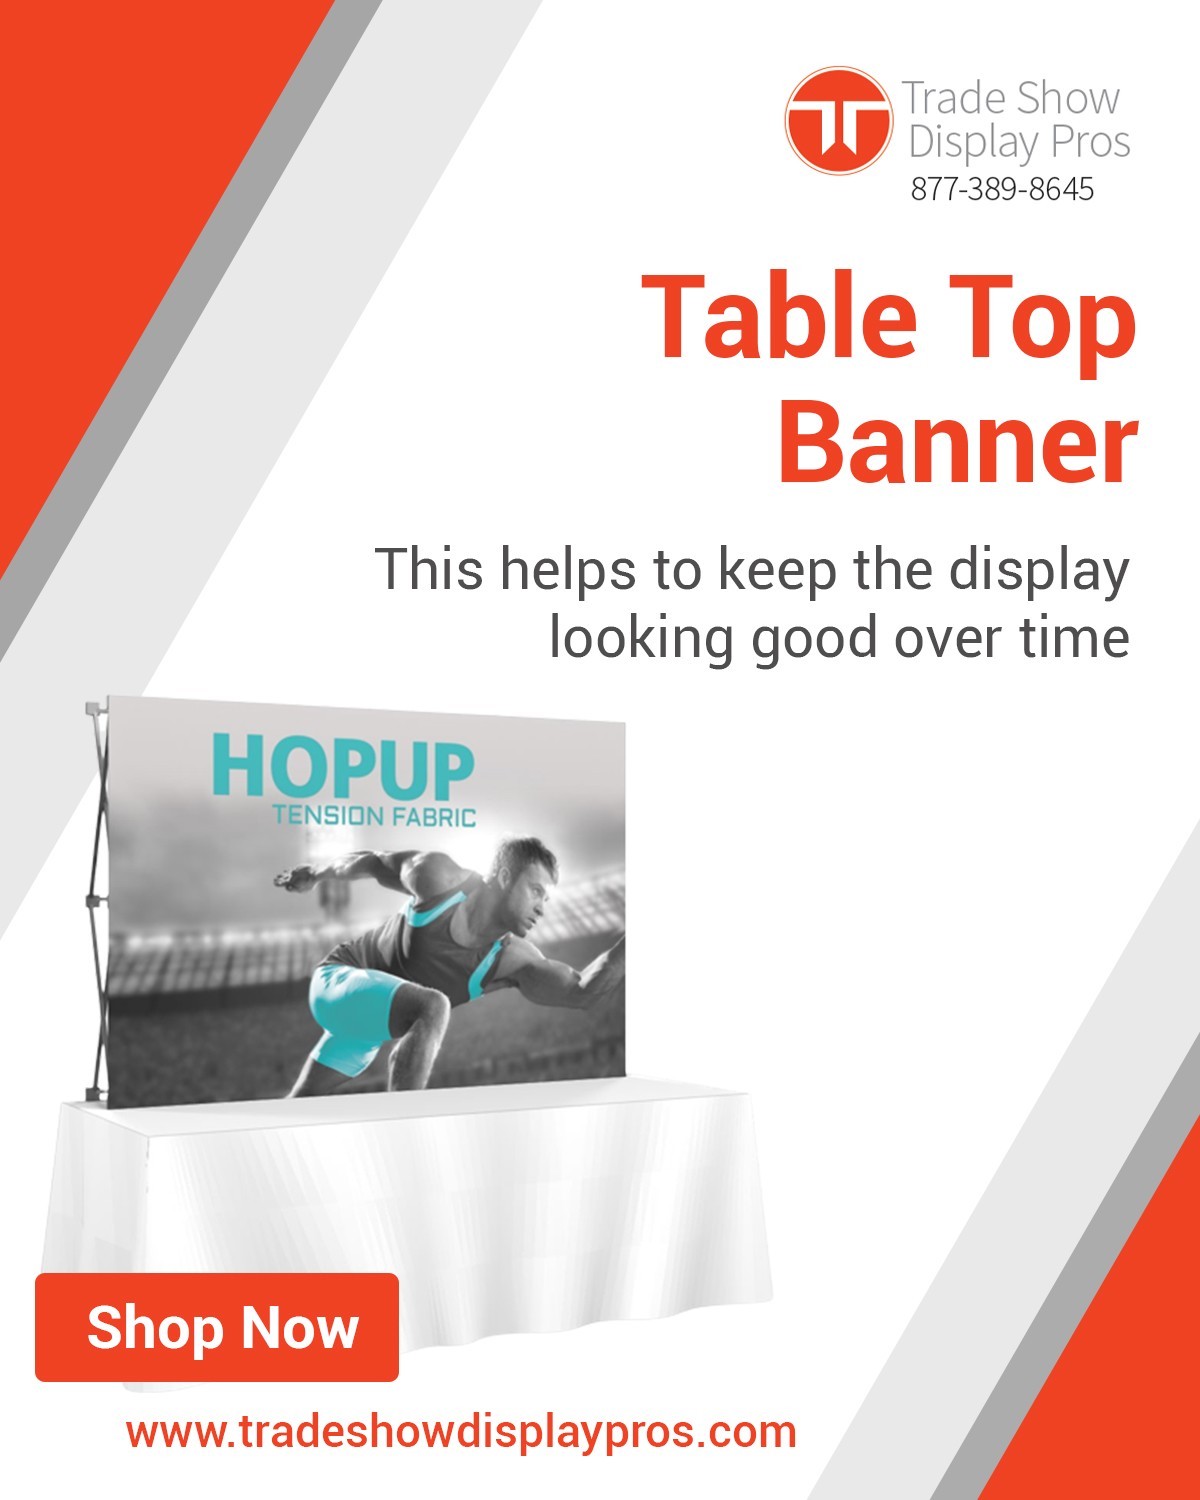 Buy Tabletop Banner from Trade Show Display Pros